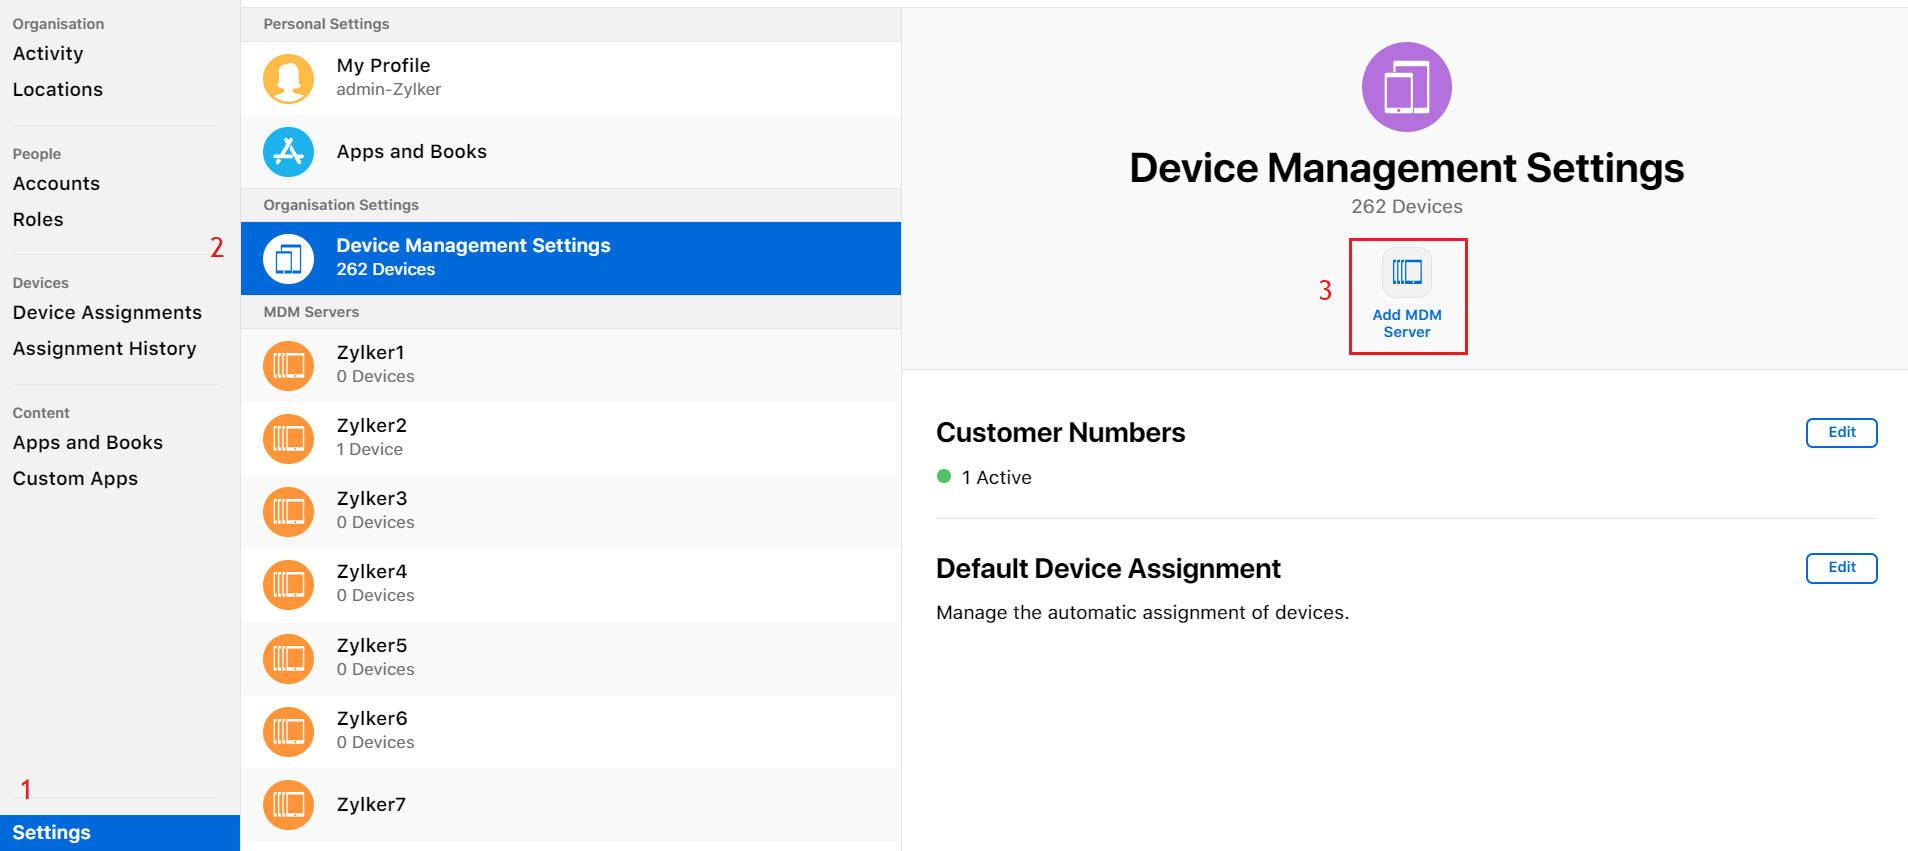 Adding MDM server on ASM (Apple School Manager) after login to the ASM portal, to integrate and use Apple devices for education